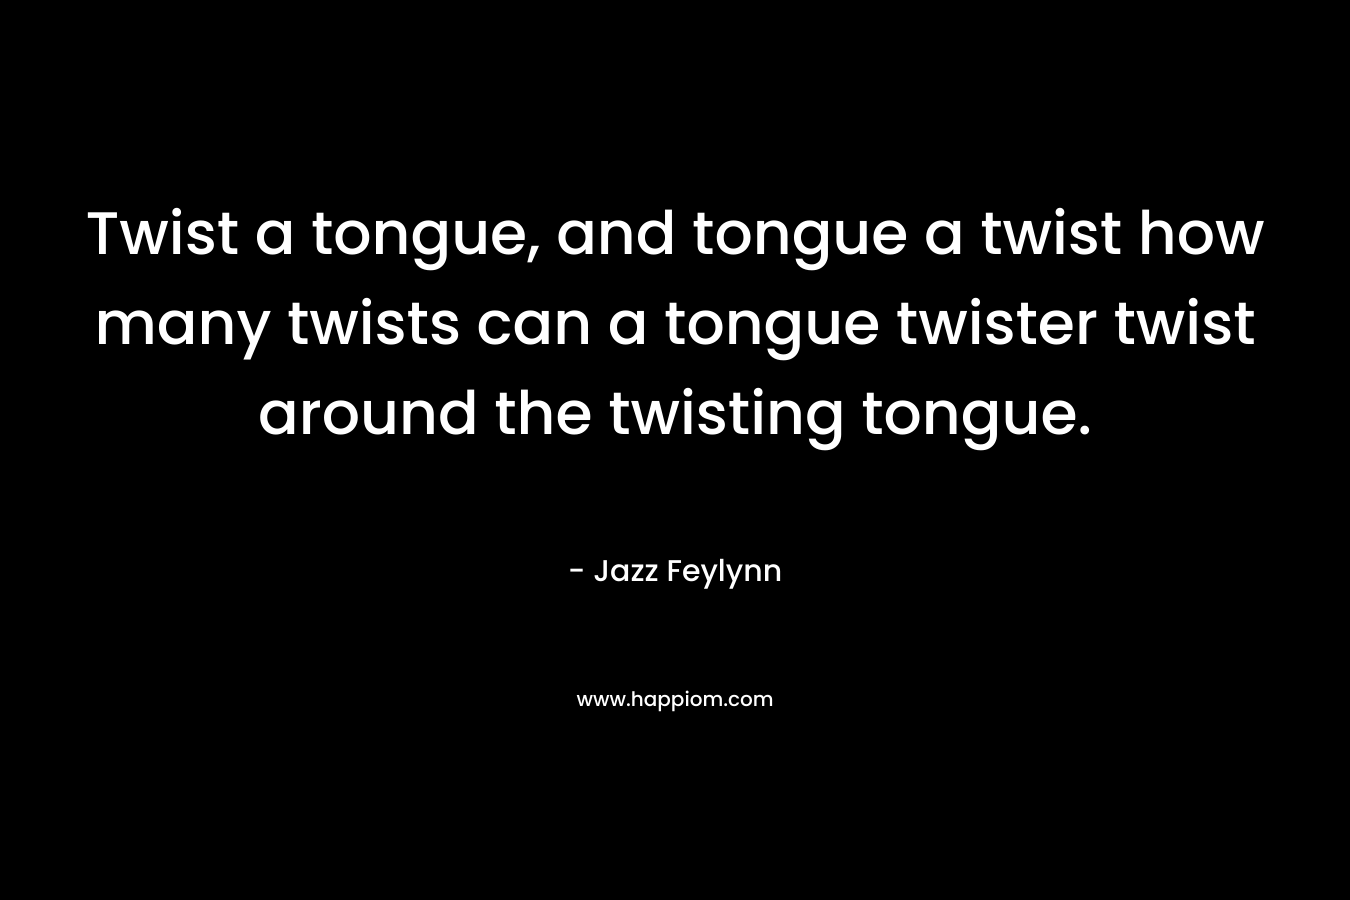 Twist a tongue, and tongue a twist how many twists can a tongue twister twist around the twisting tongue. – Jazz Feylynn